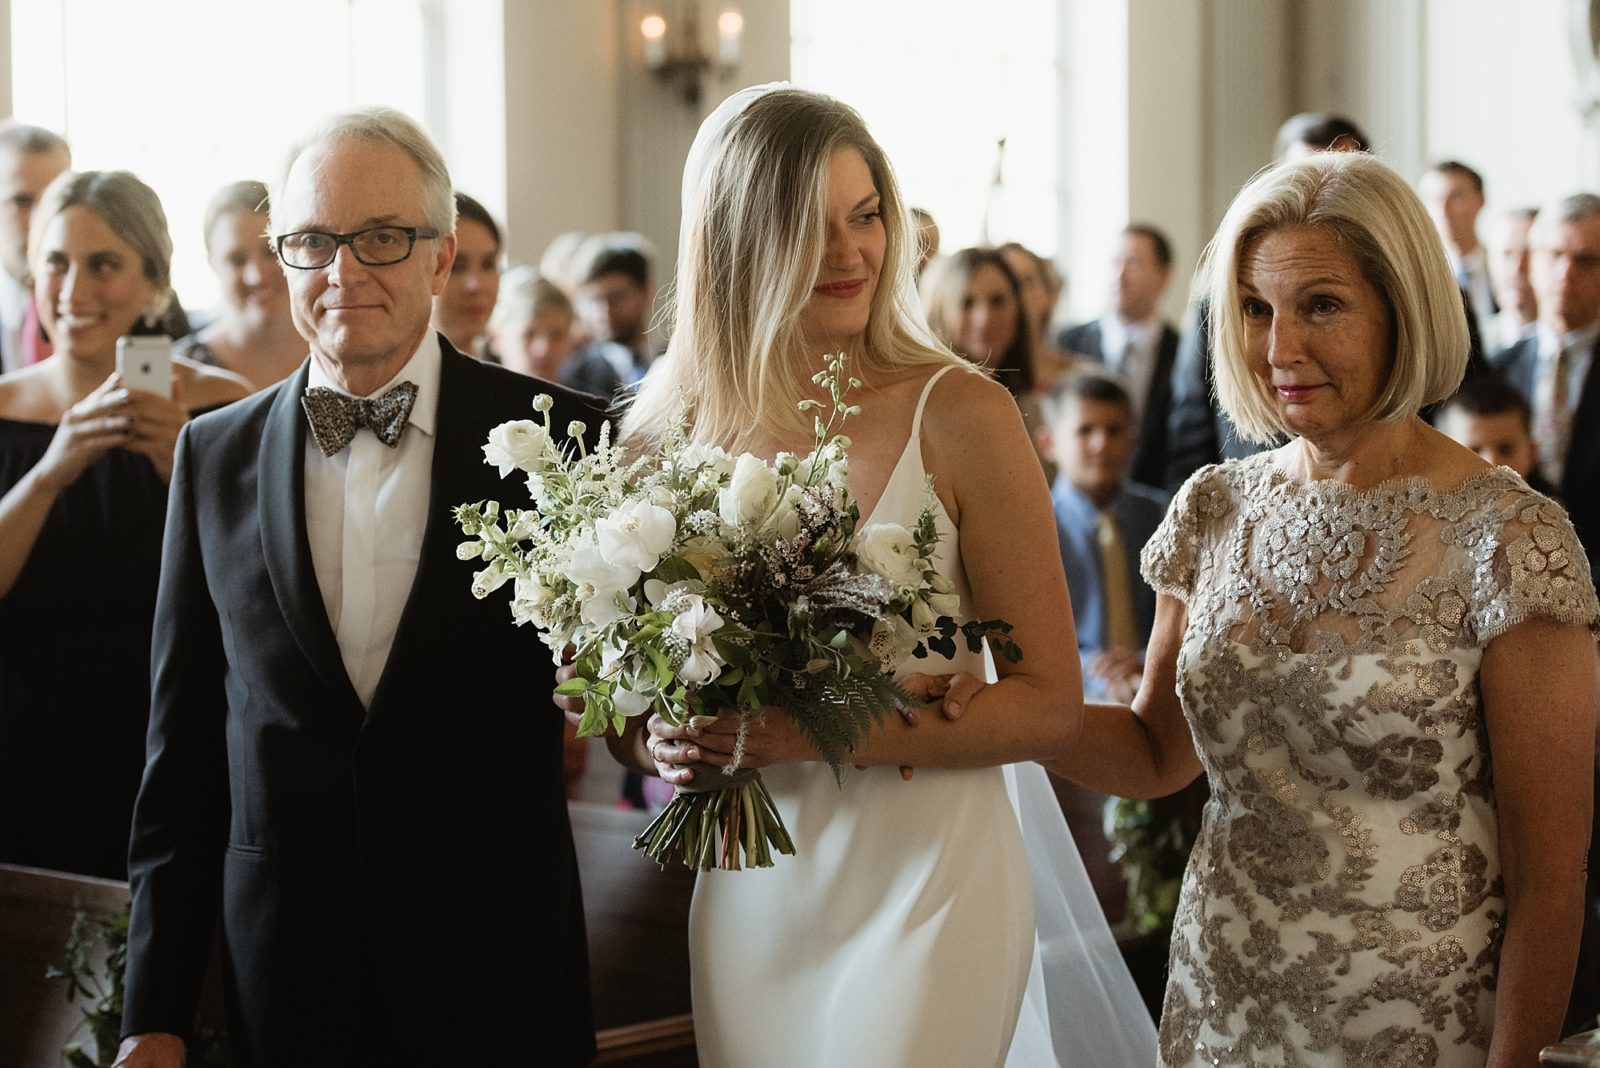 Bride walking down the aisle with parents in modern cream and white wedding